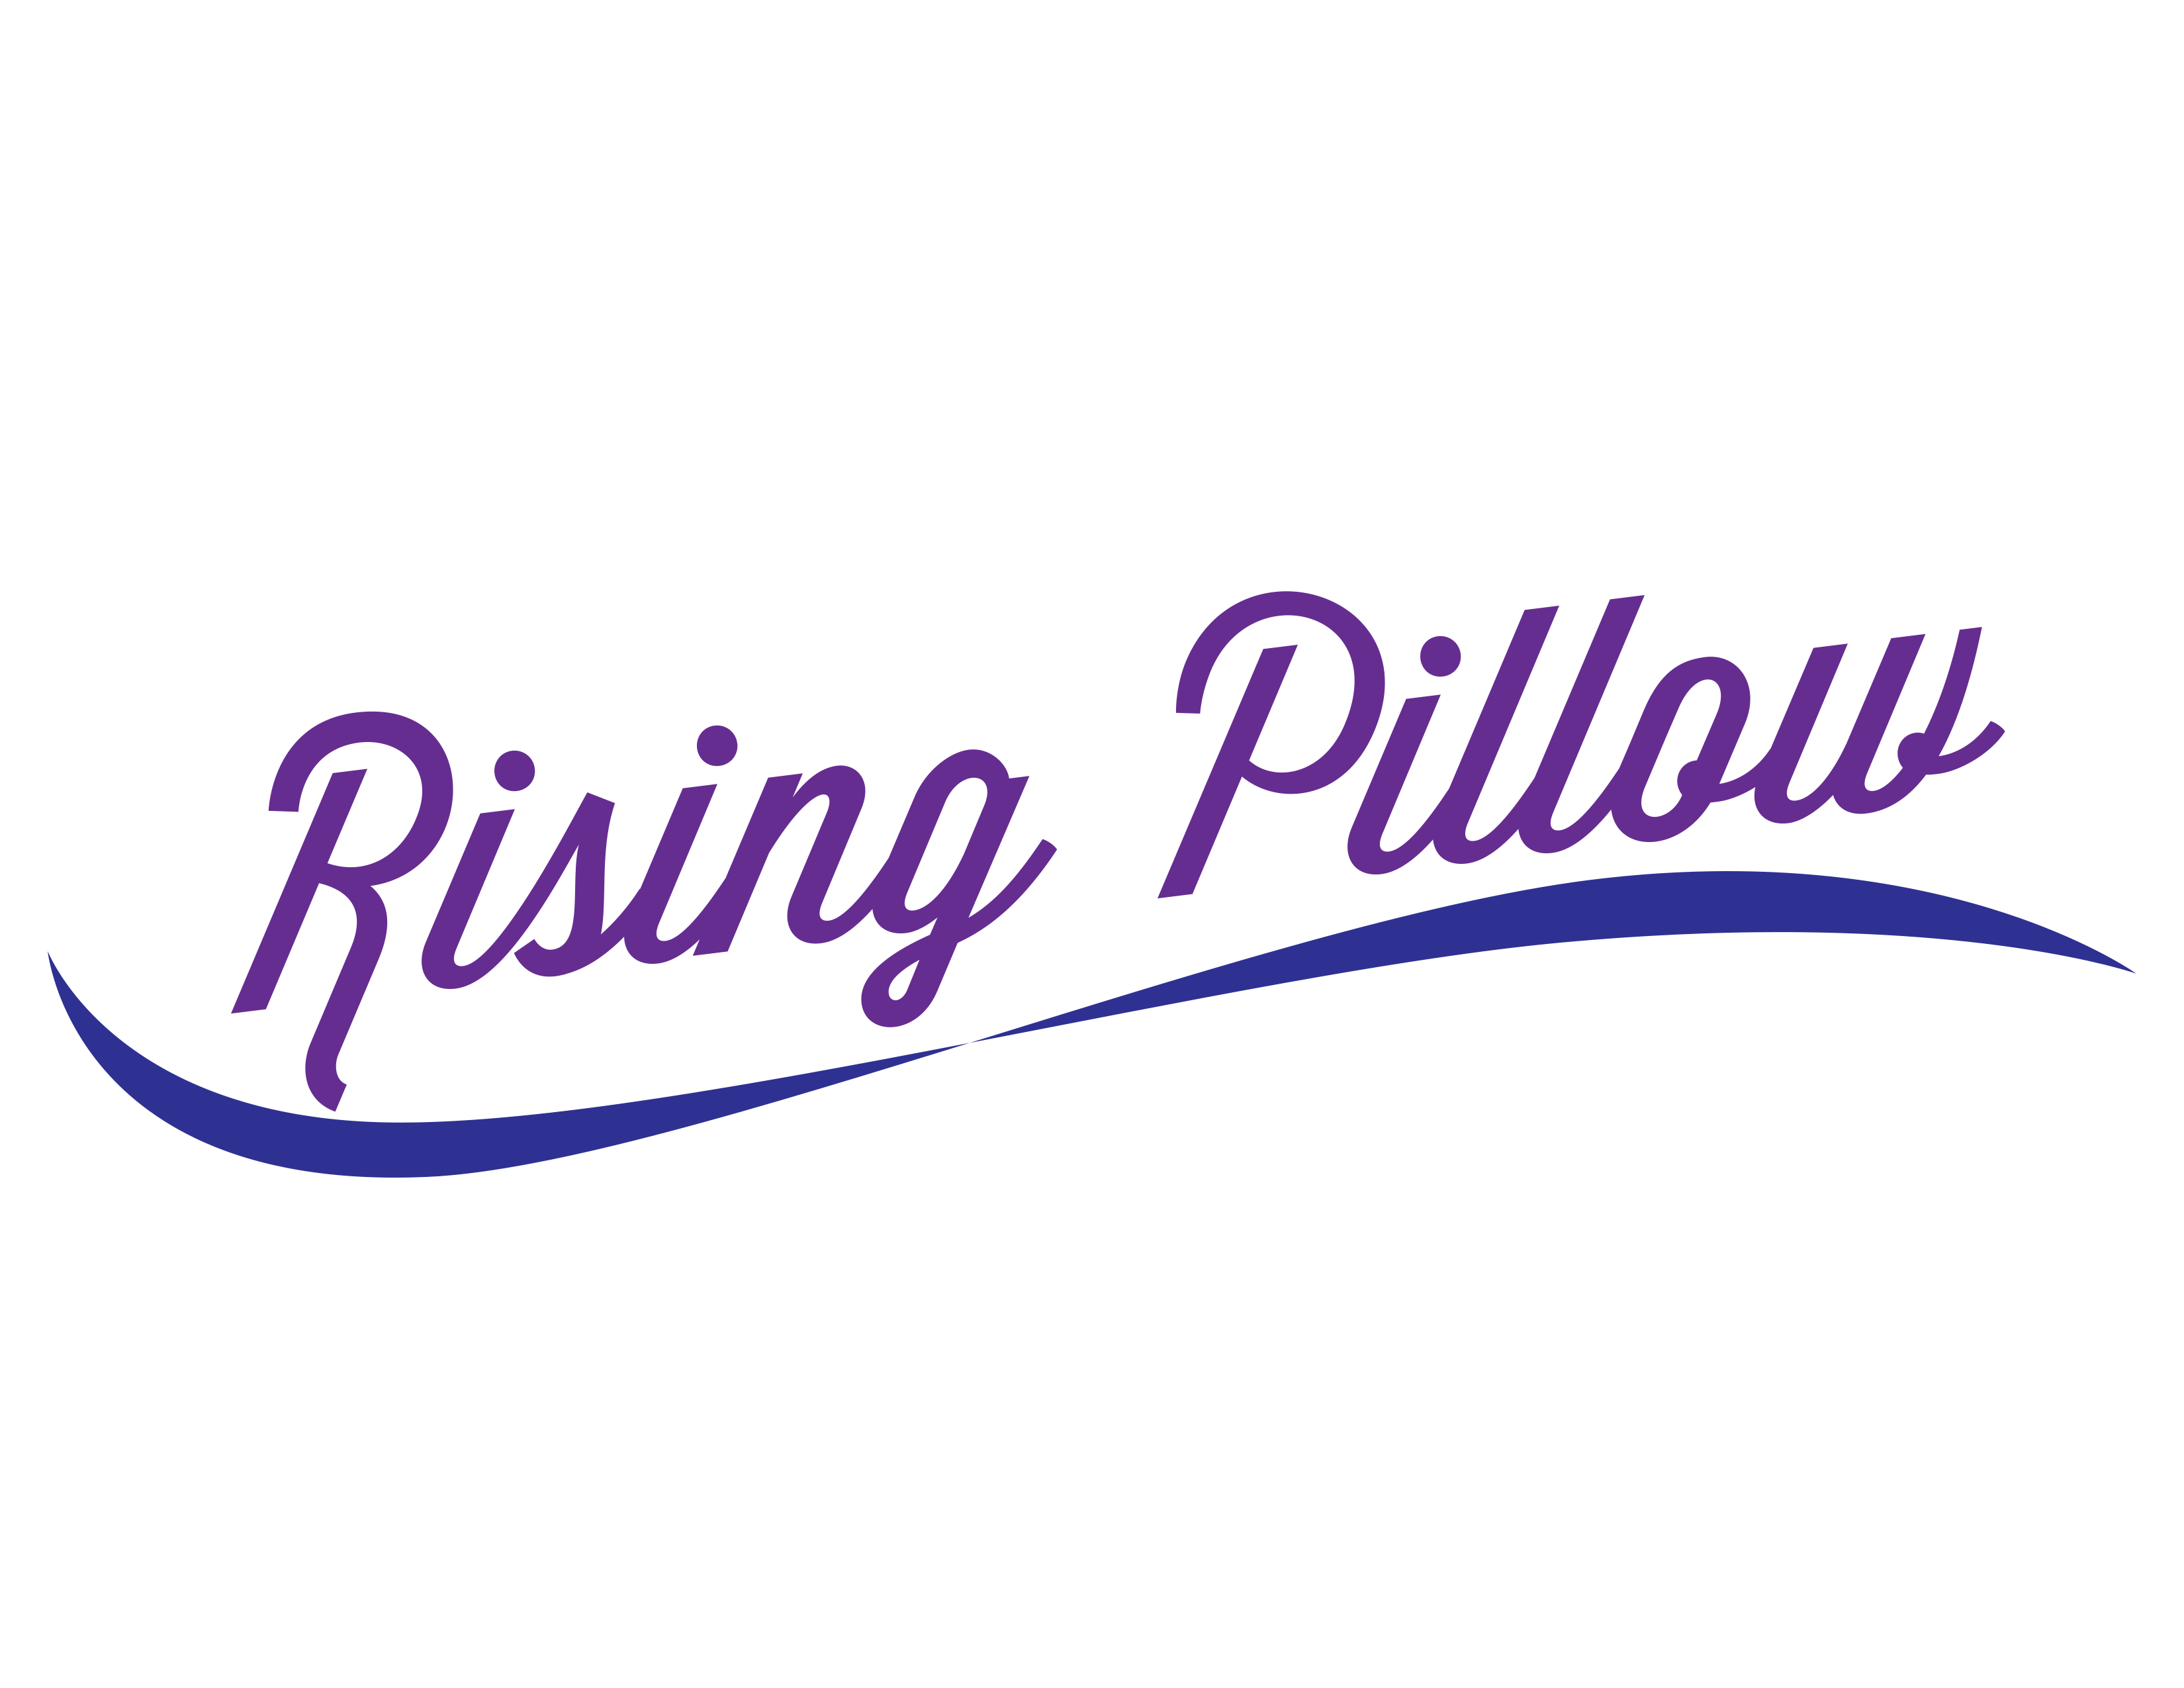 The Rising Pillow is a new pillow invention that emphasis comfort and gives users the ability to sit upright.